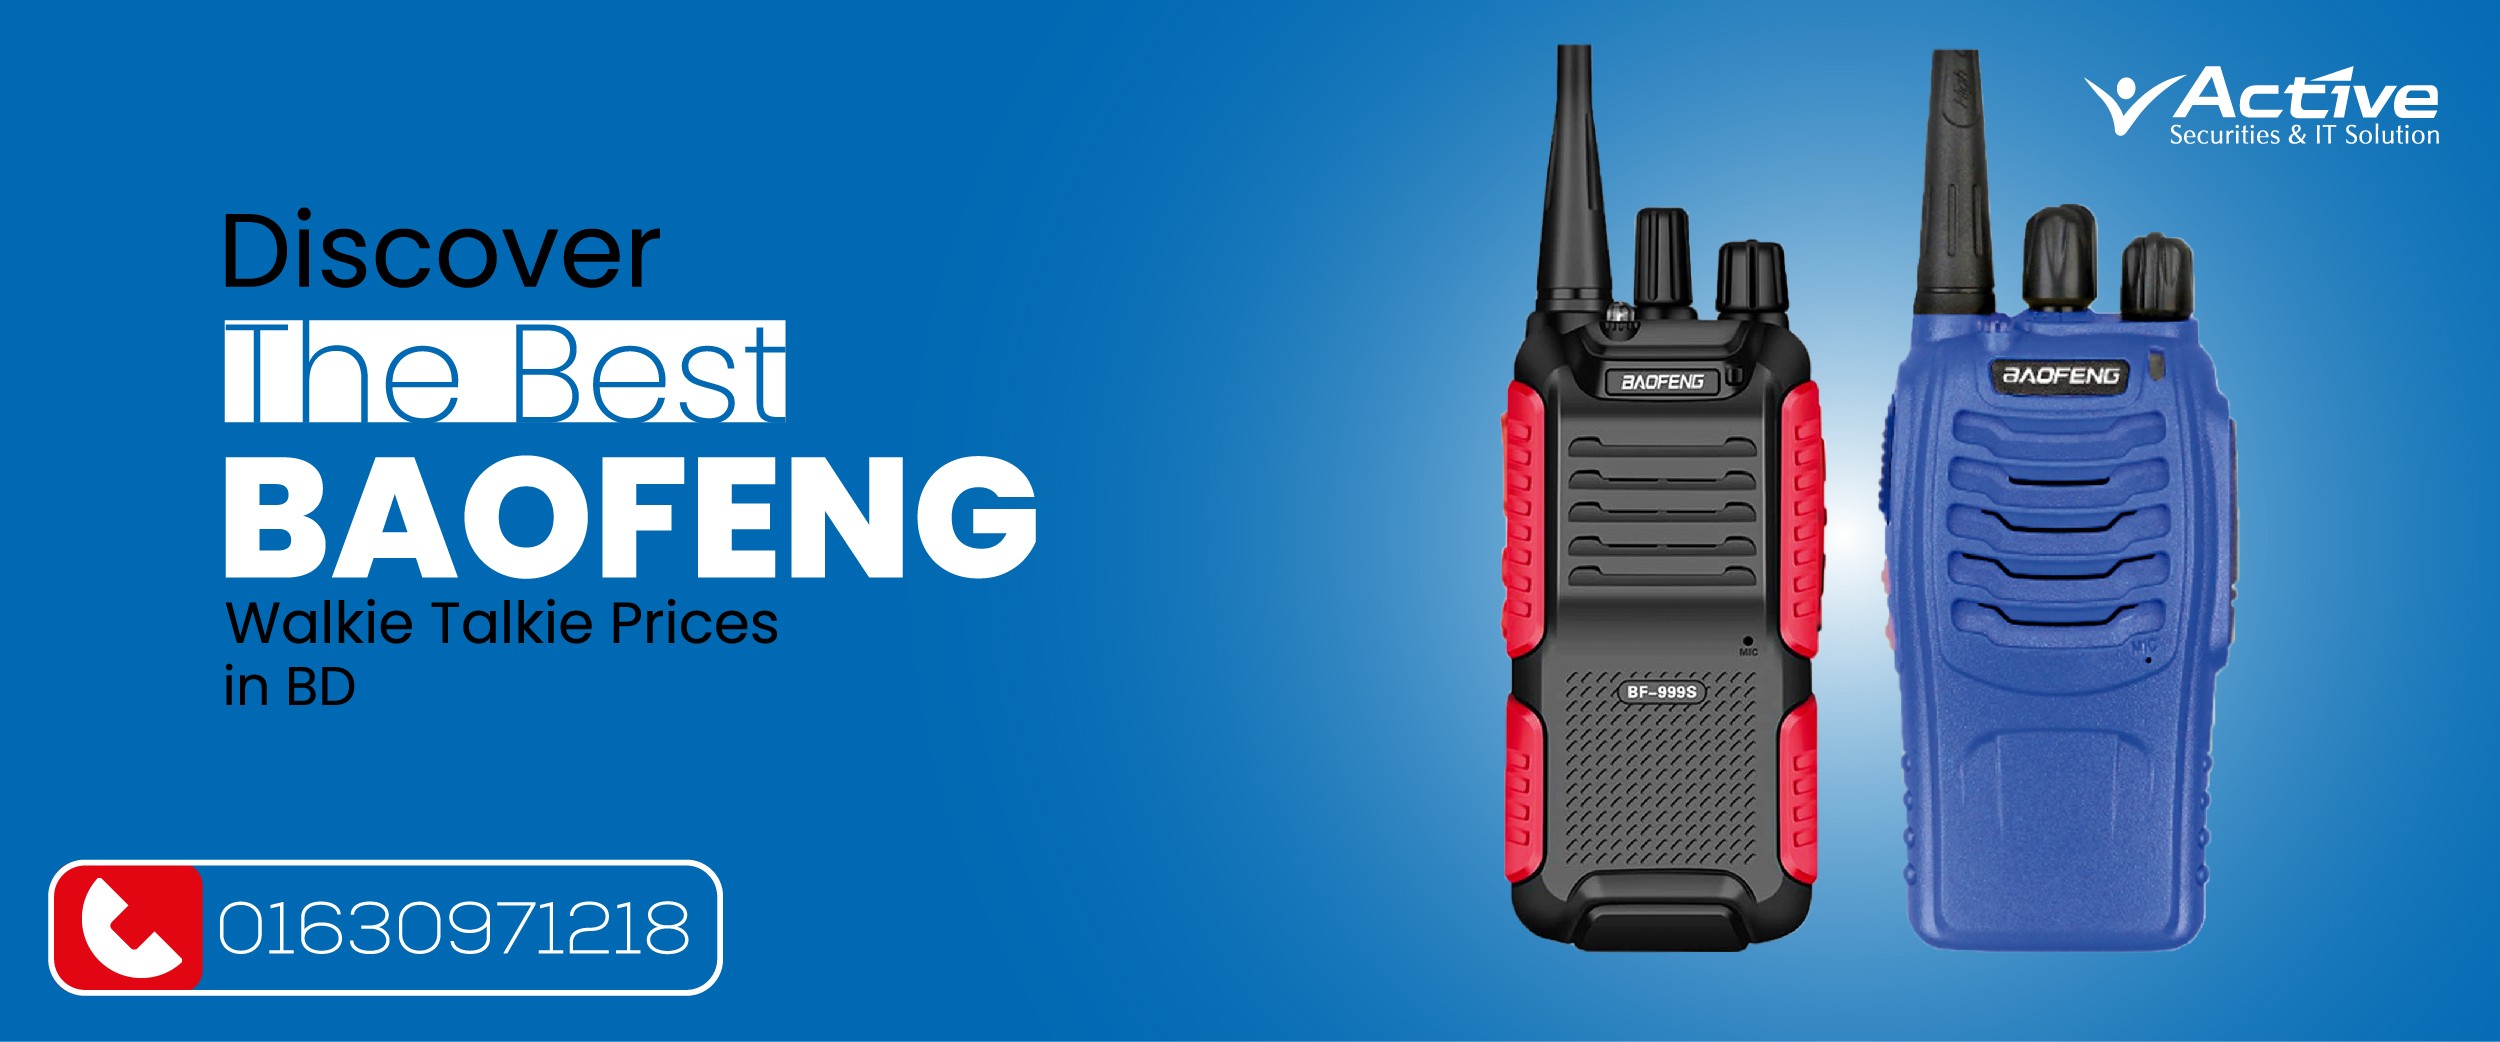 Discover the Best Baofeng Walkie Talkie Prices in BD | Active Force